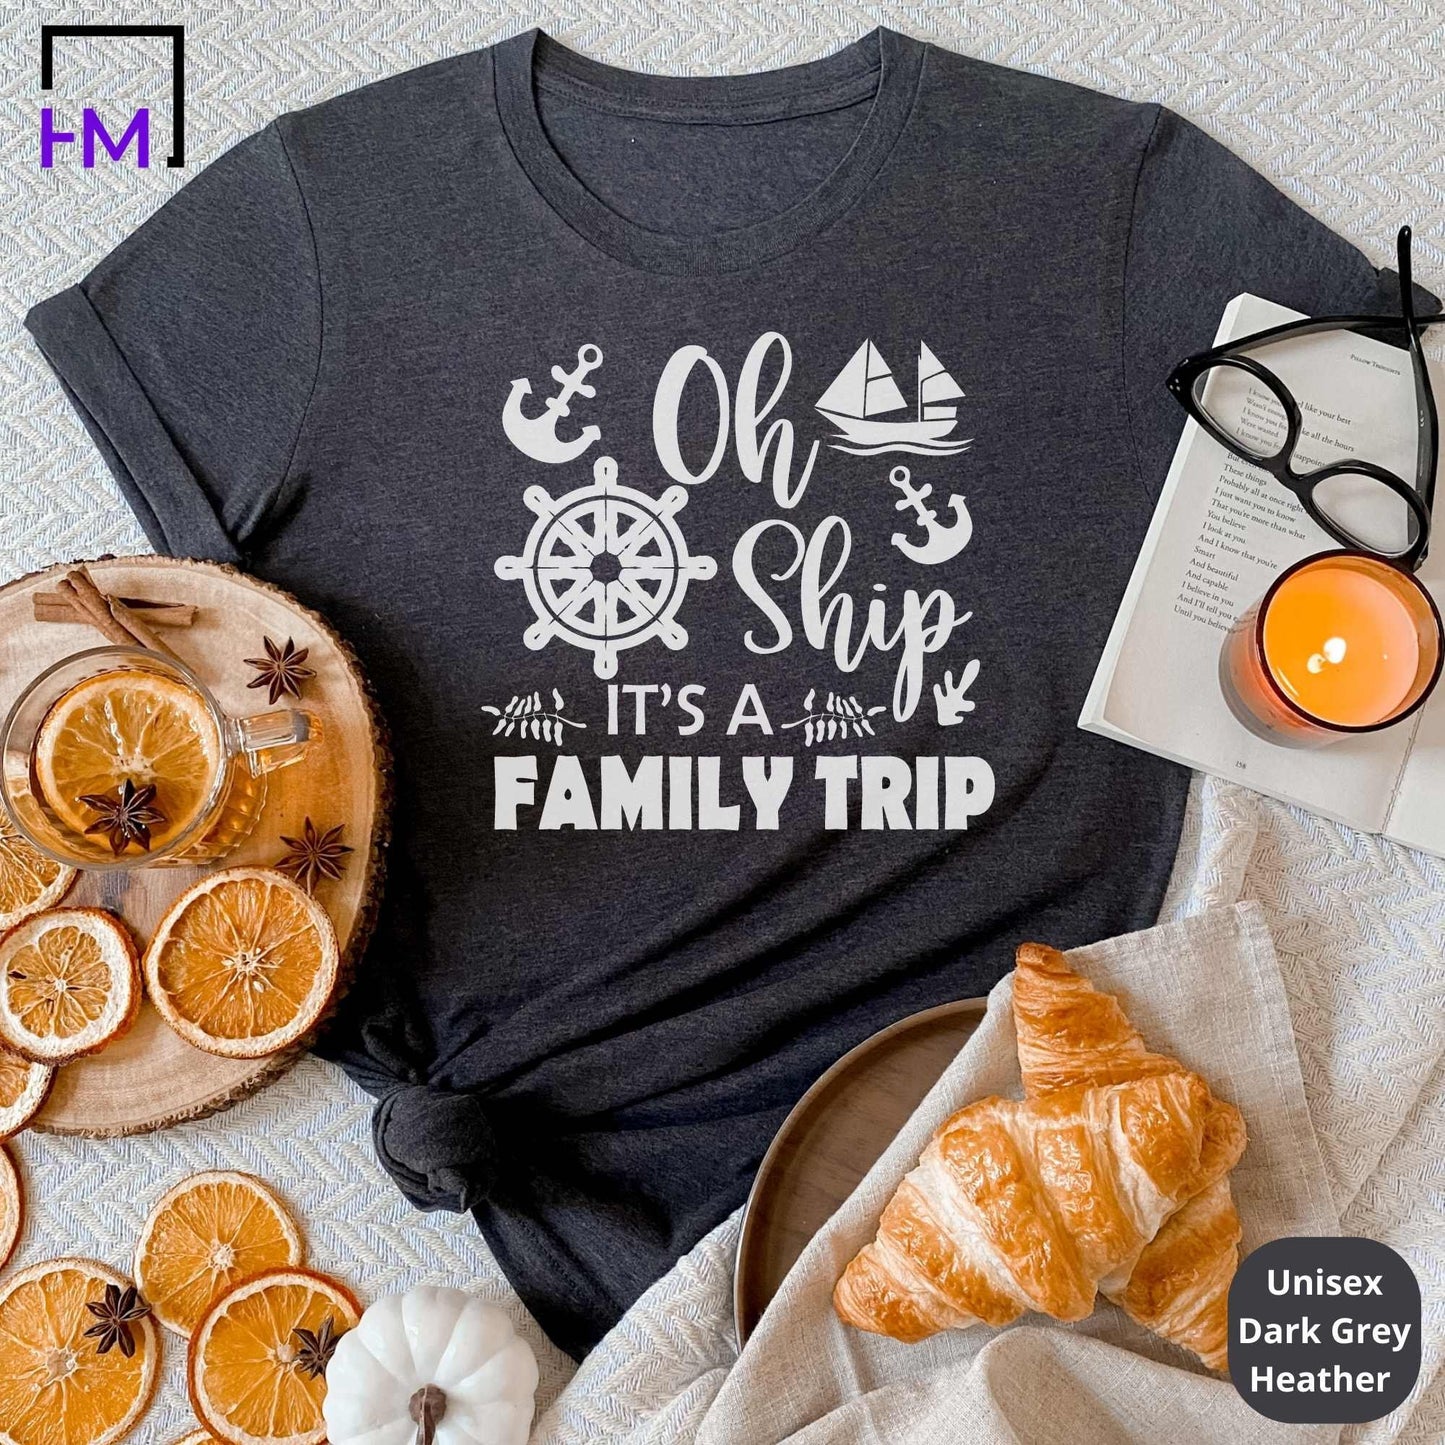 Oh Ship Its a Family Trip Cruise Shirts HMDesignStudioUS